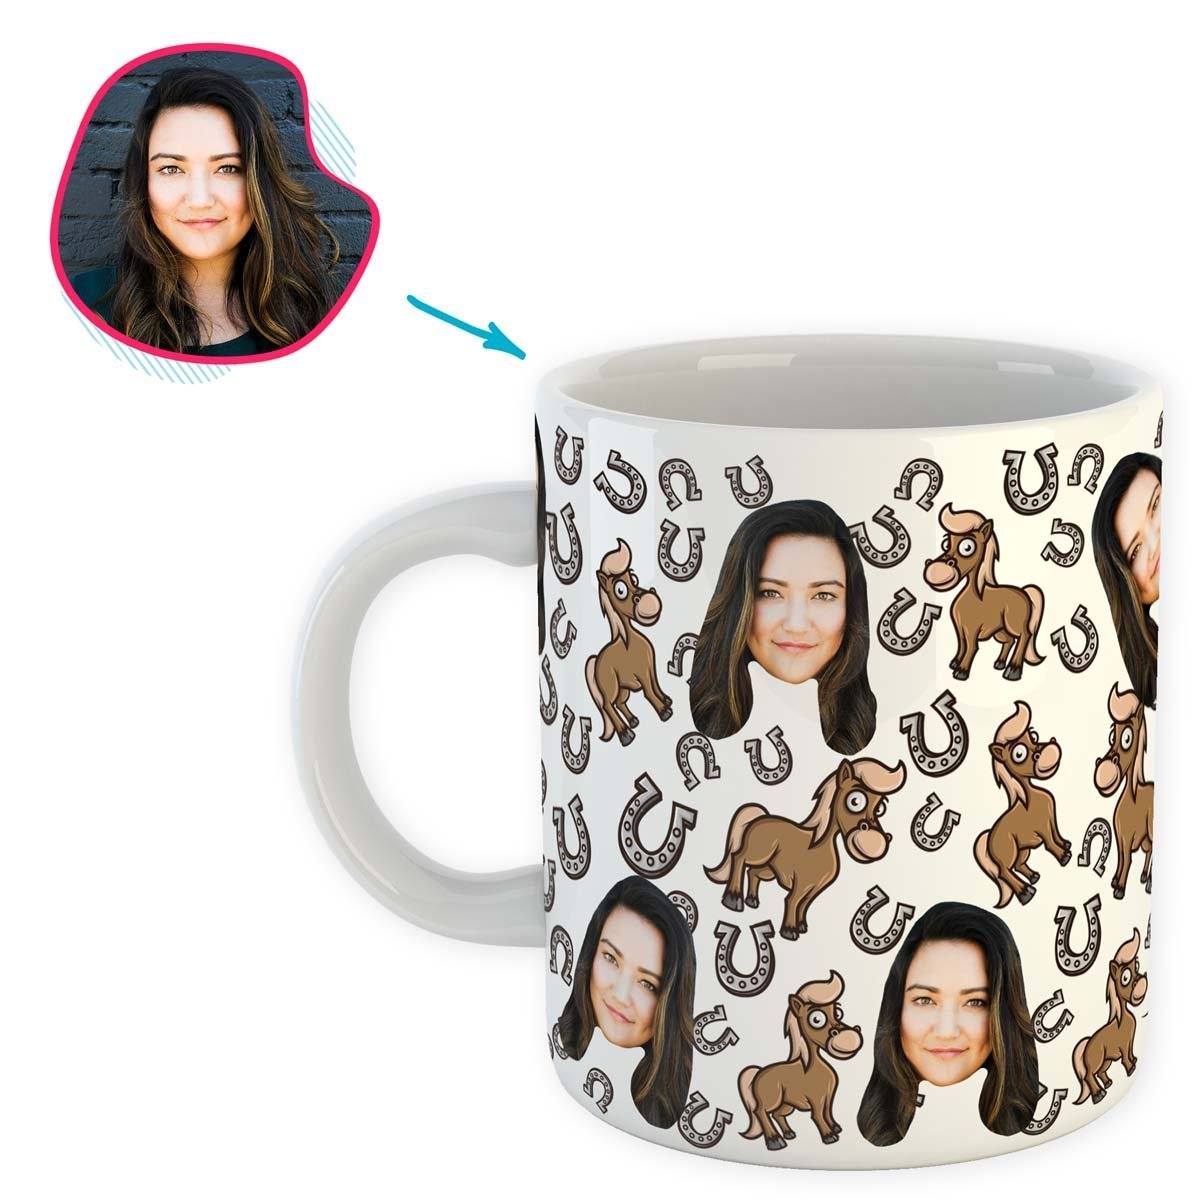 white Horse mug personalized with photo of face printed on it